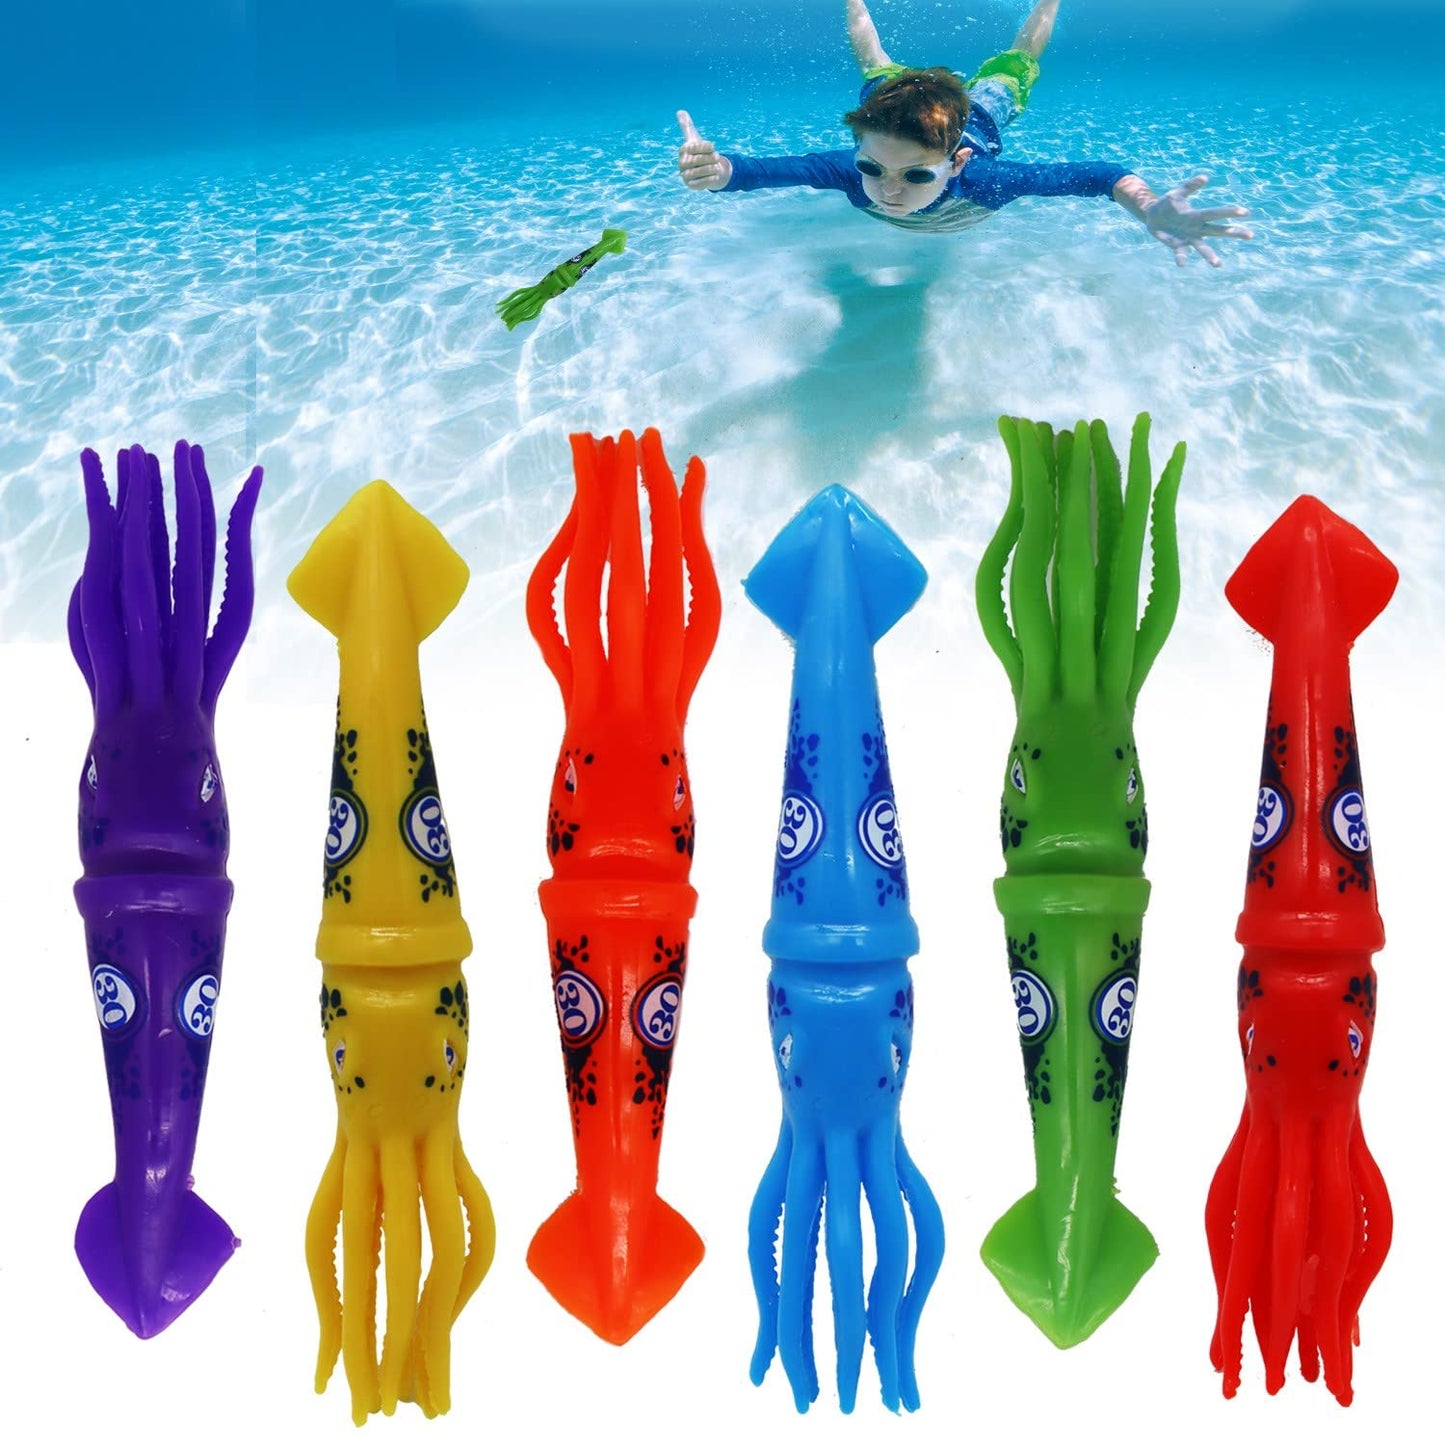 Squid Torpedo Pool Diving Toy Set for Kids, Practice Underwater Diving and Swimming, Multicolor Sinking Squids (Set of 6 Pieces) Multicolor Squid